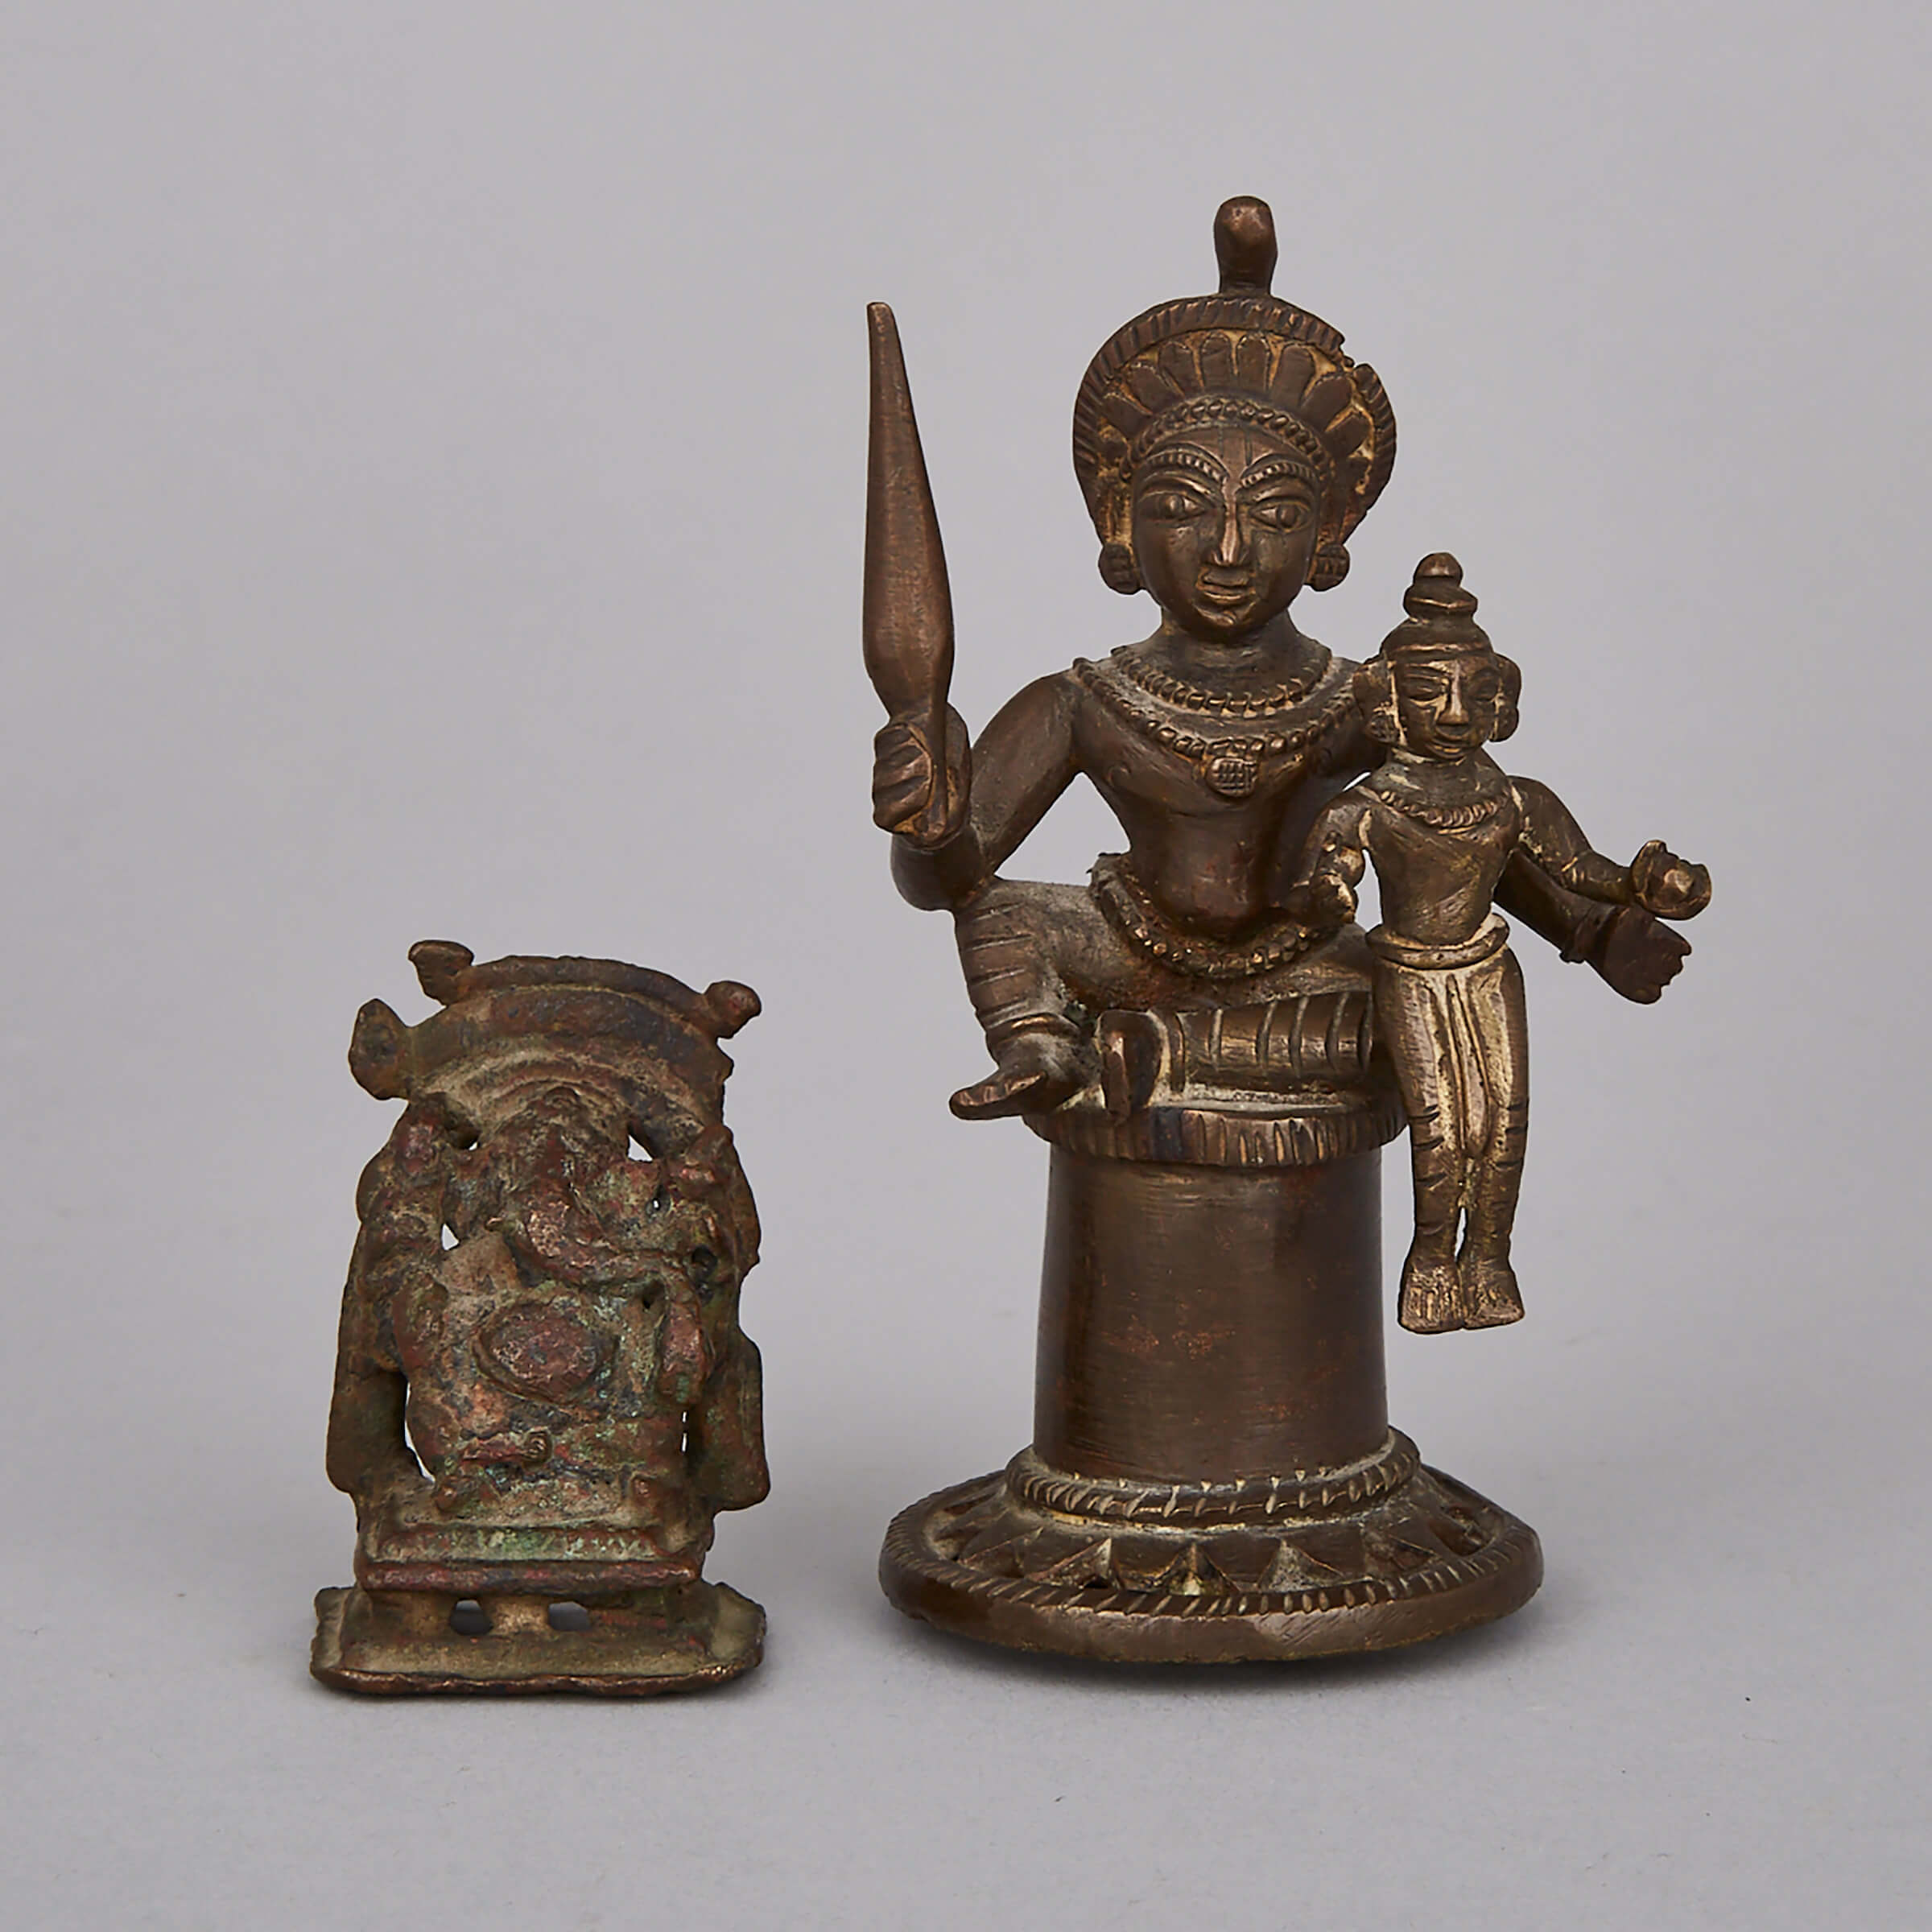 Two Indian Bronzes, 19th/20th Century